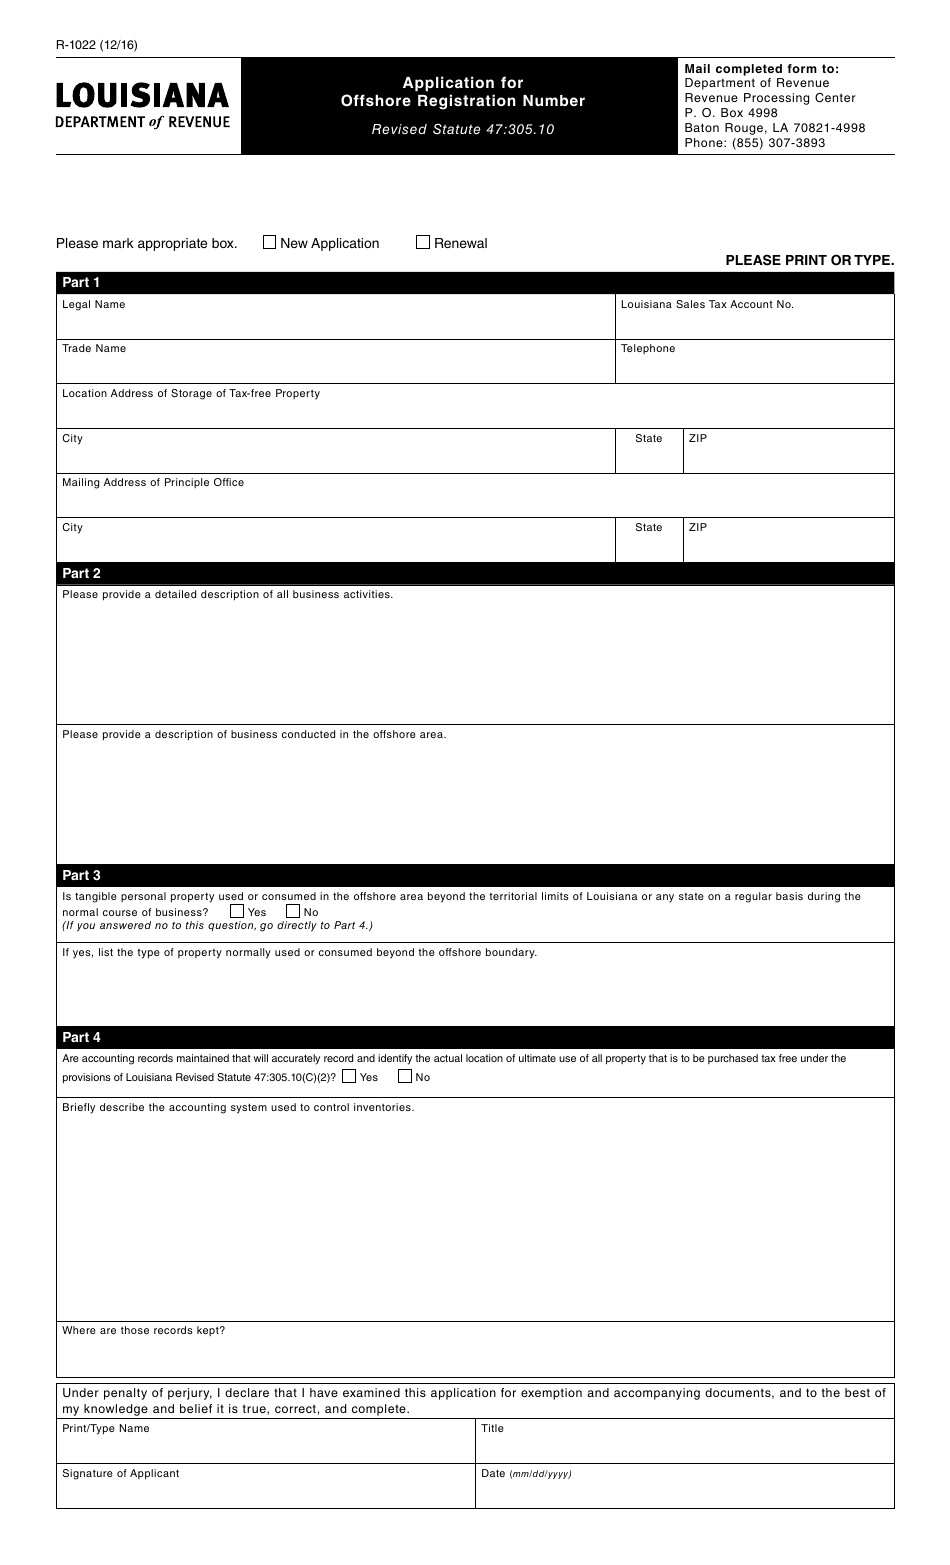 Form R-1022 Application for Offshore Registration Number - Louisiana, Page 1